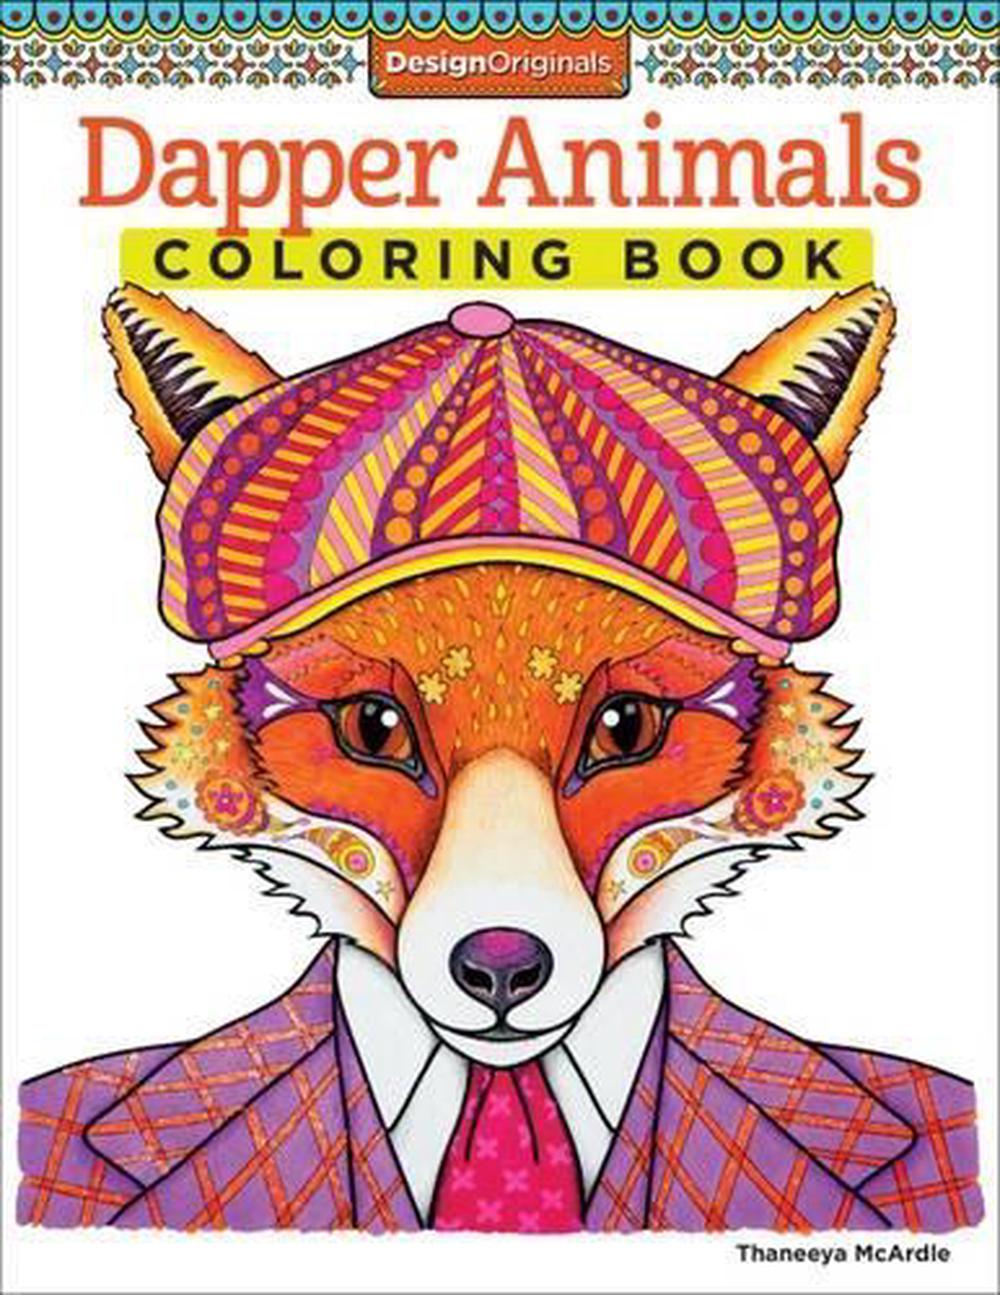 Download Dapper Animals Coloring Book by Thaneeya Mcardle (English) Paperback Book Free S 9781574219586 ...